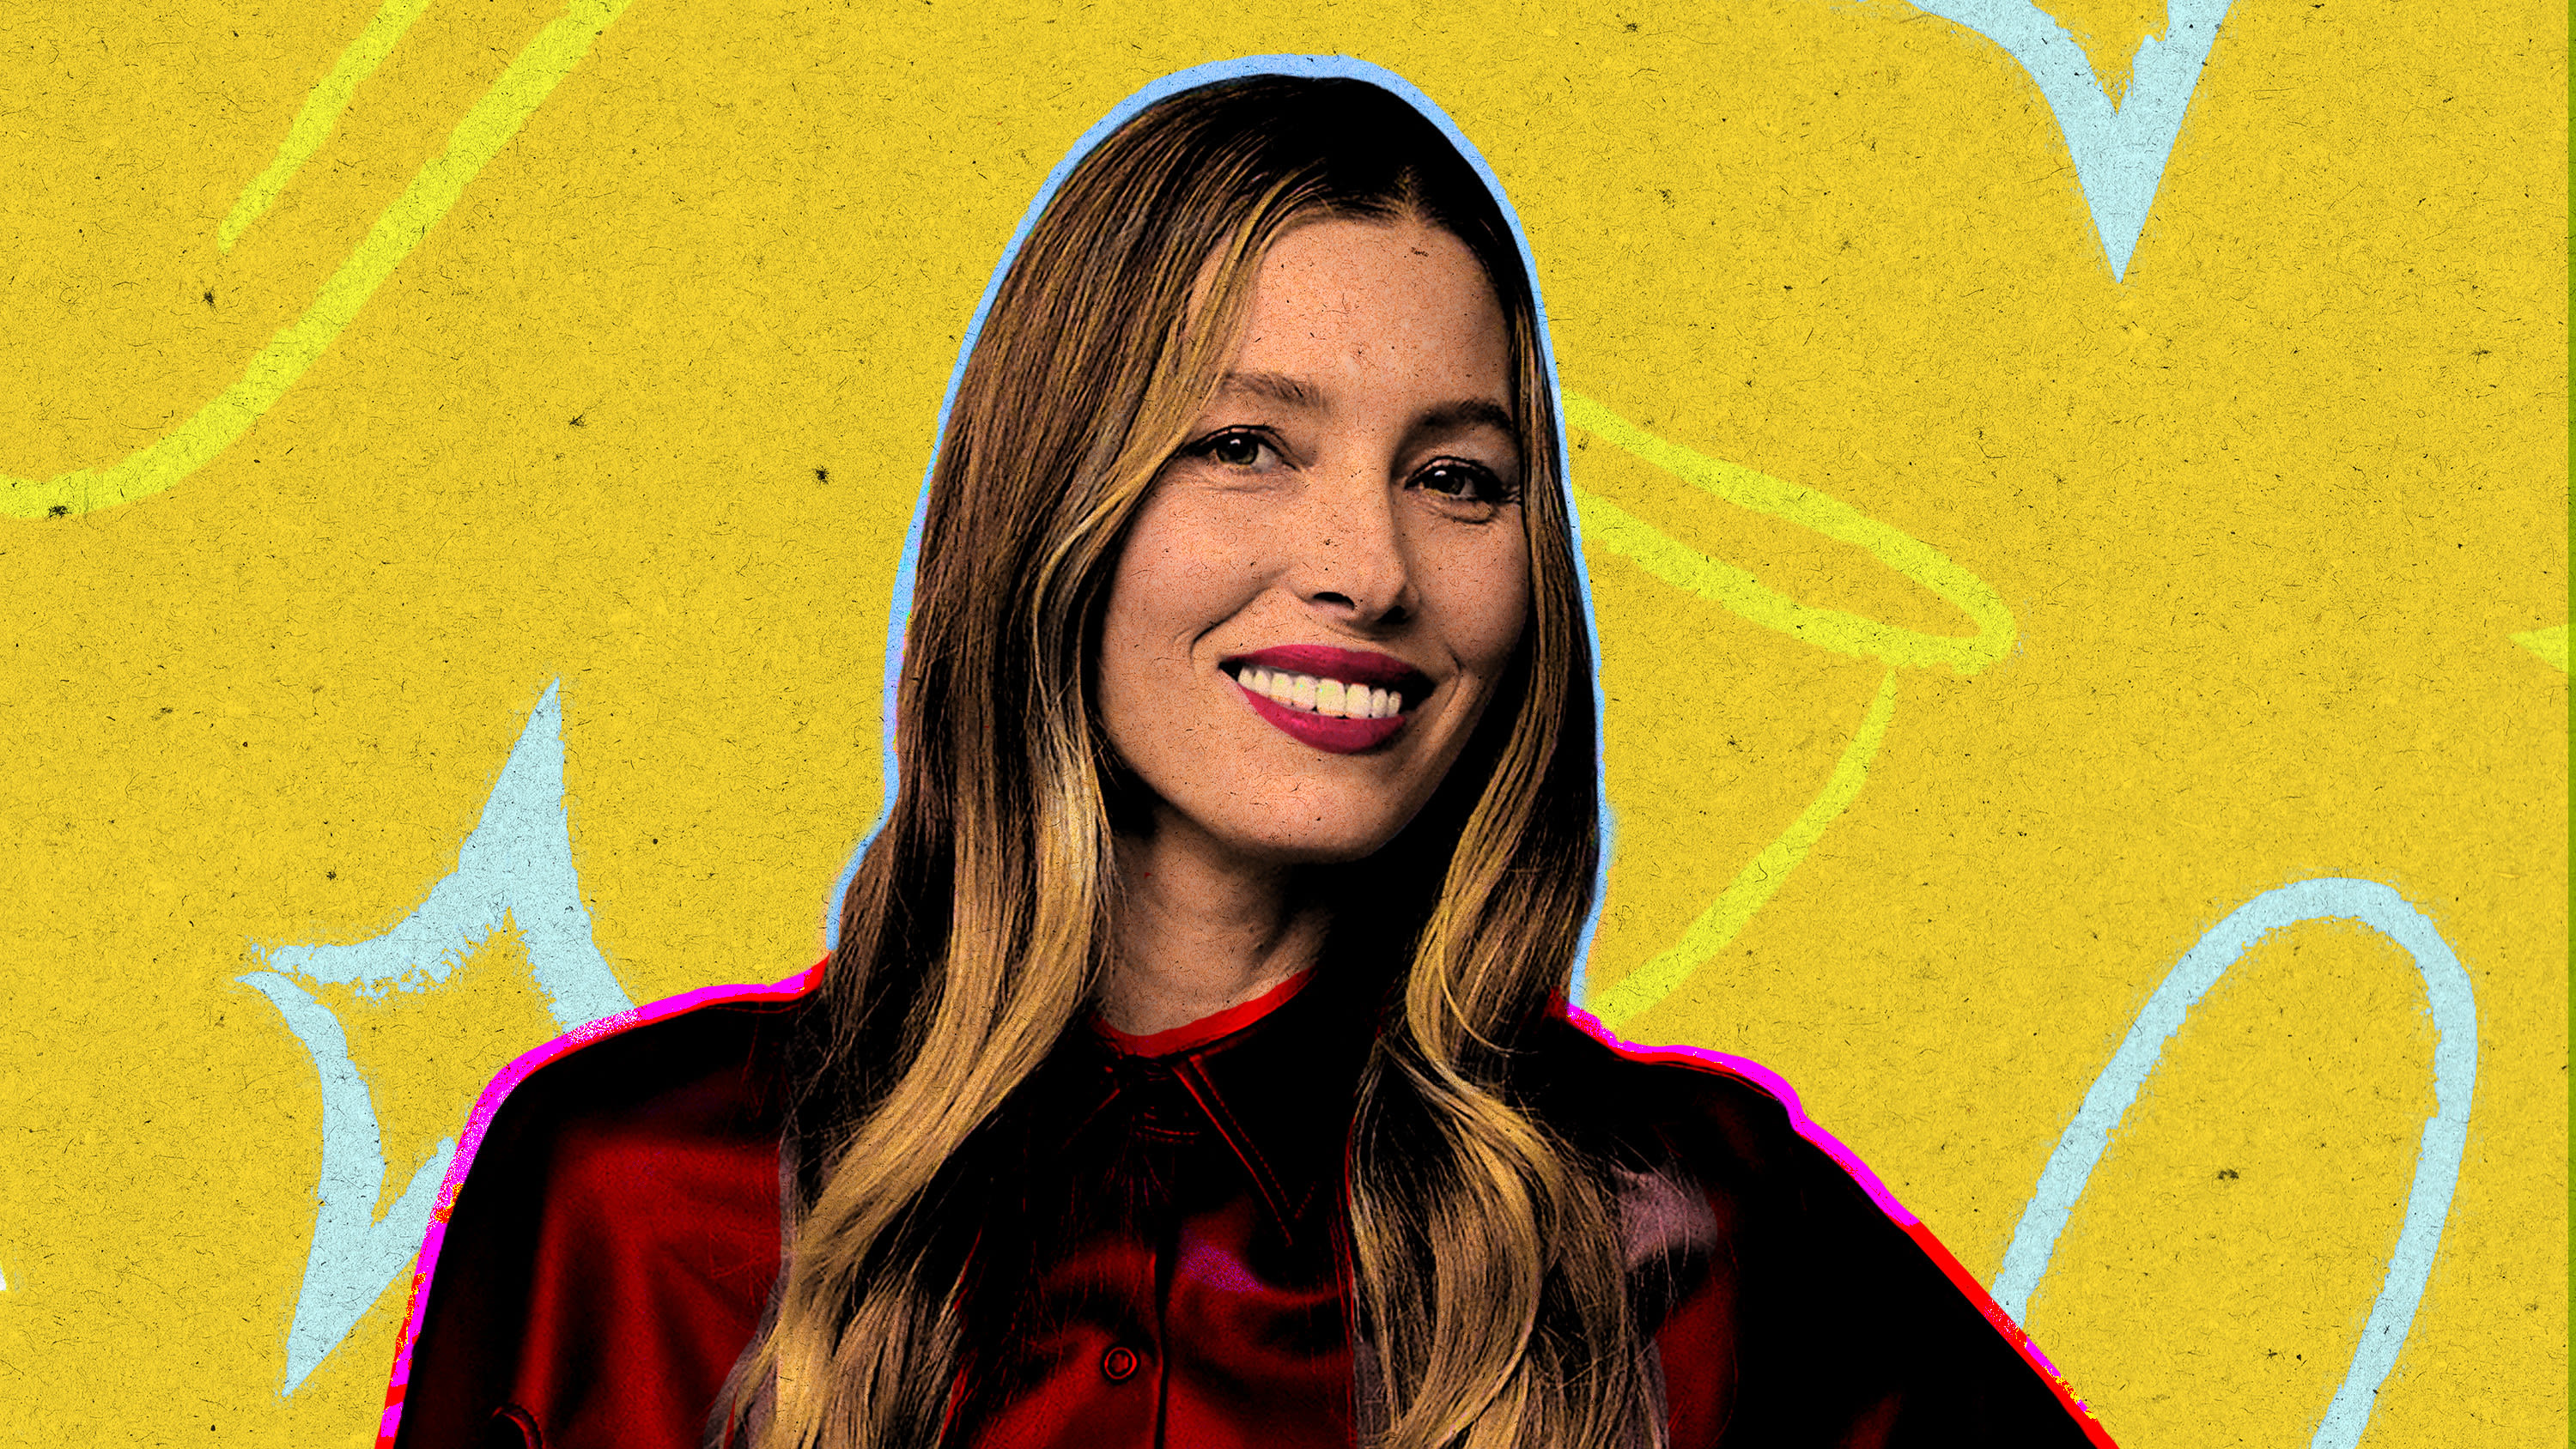 Jessica Biel was 'really freaked out' when she got her first period at 11 — so she wrote a book to help other kids